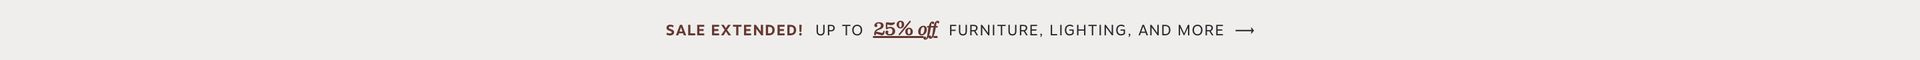 Sale Extended - Up to 25% off furniture, lighting & more | Scout & Nimble Memorial Day Sale